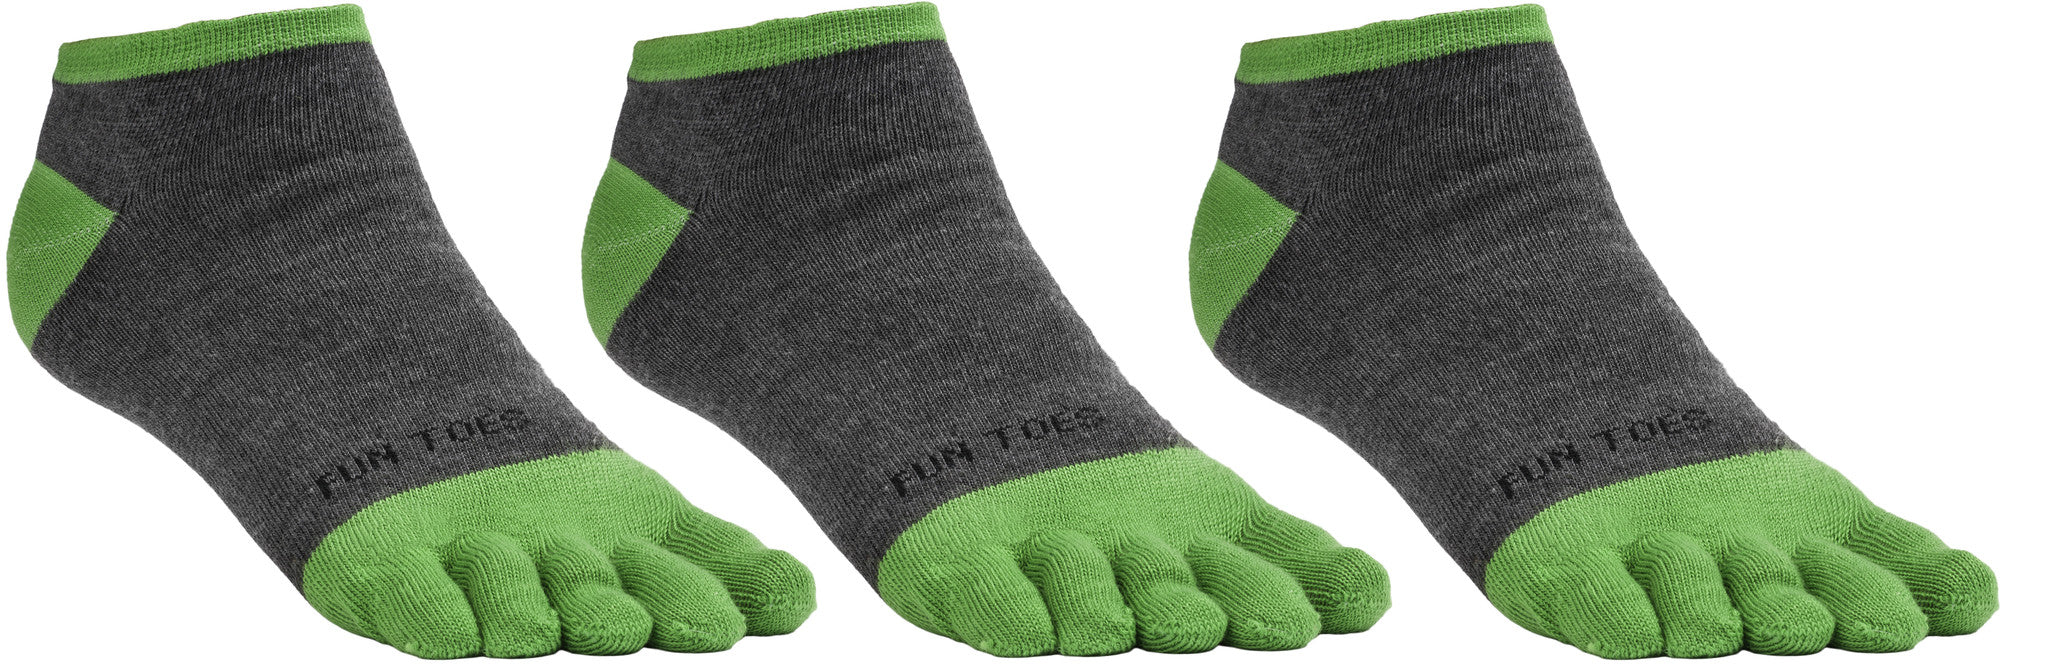 Toes Socks for Barefoot Shoes